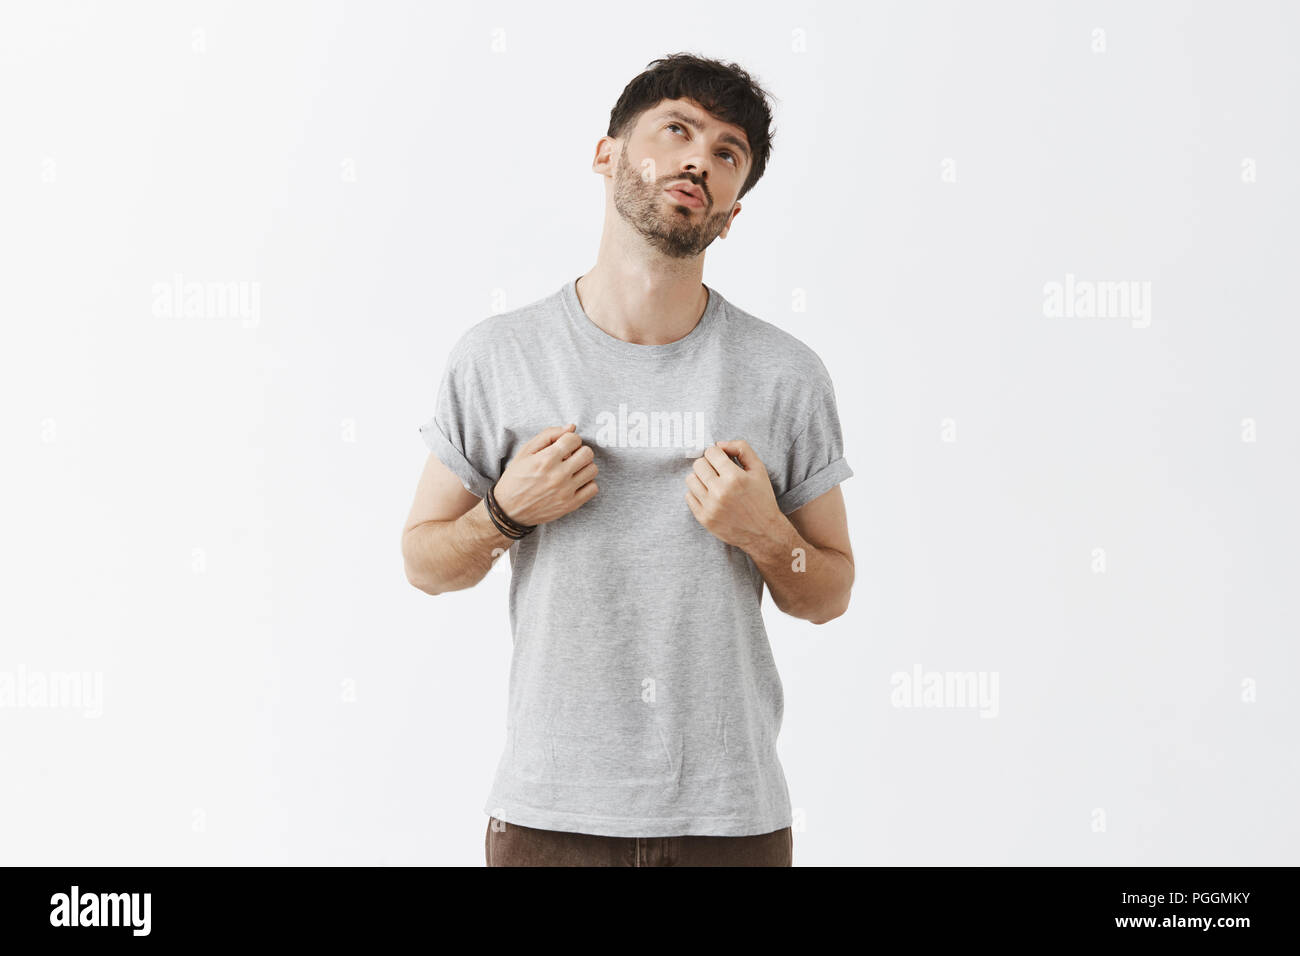 Displeased and picky stylish guy expressing dislike being displeased with new t-shirt girlfriend bought touching shirt as if feeling hot breathing out and looking up with tired expression Stock Photo